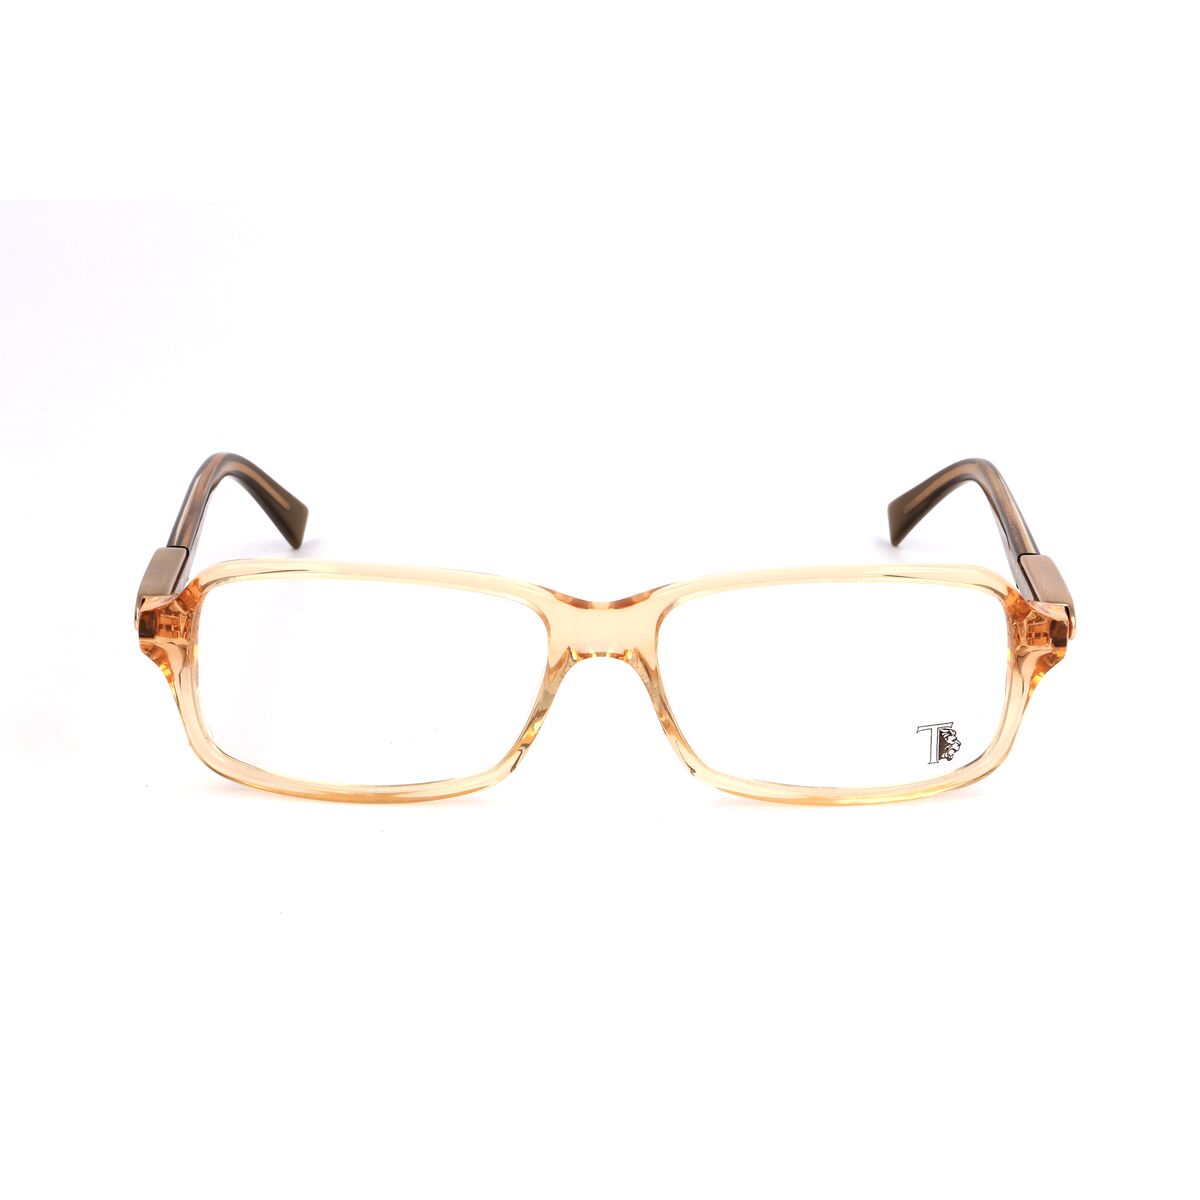 Ladies'Spectacle frame Tods TO5018-044-54 Orange